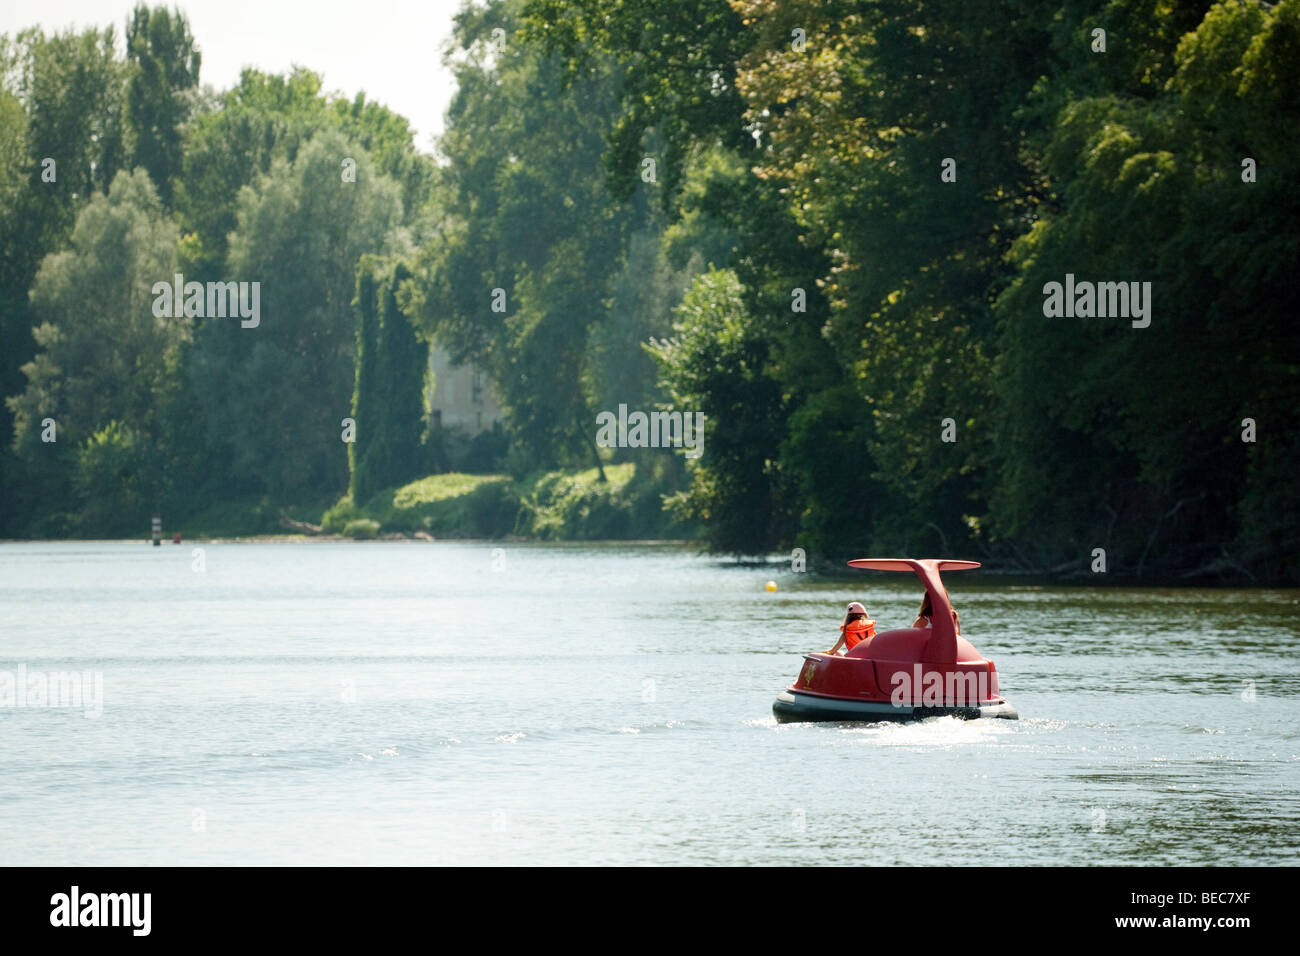 A family having fun in hover boats on the River Lot at Castelmoron, Aquitaine, France Stock Photo